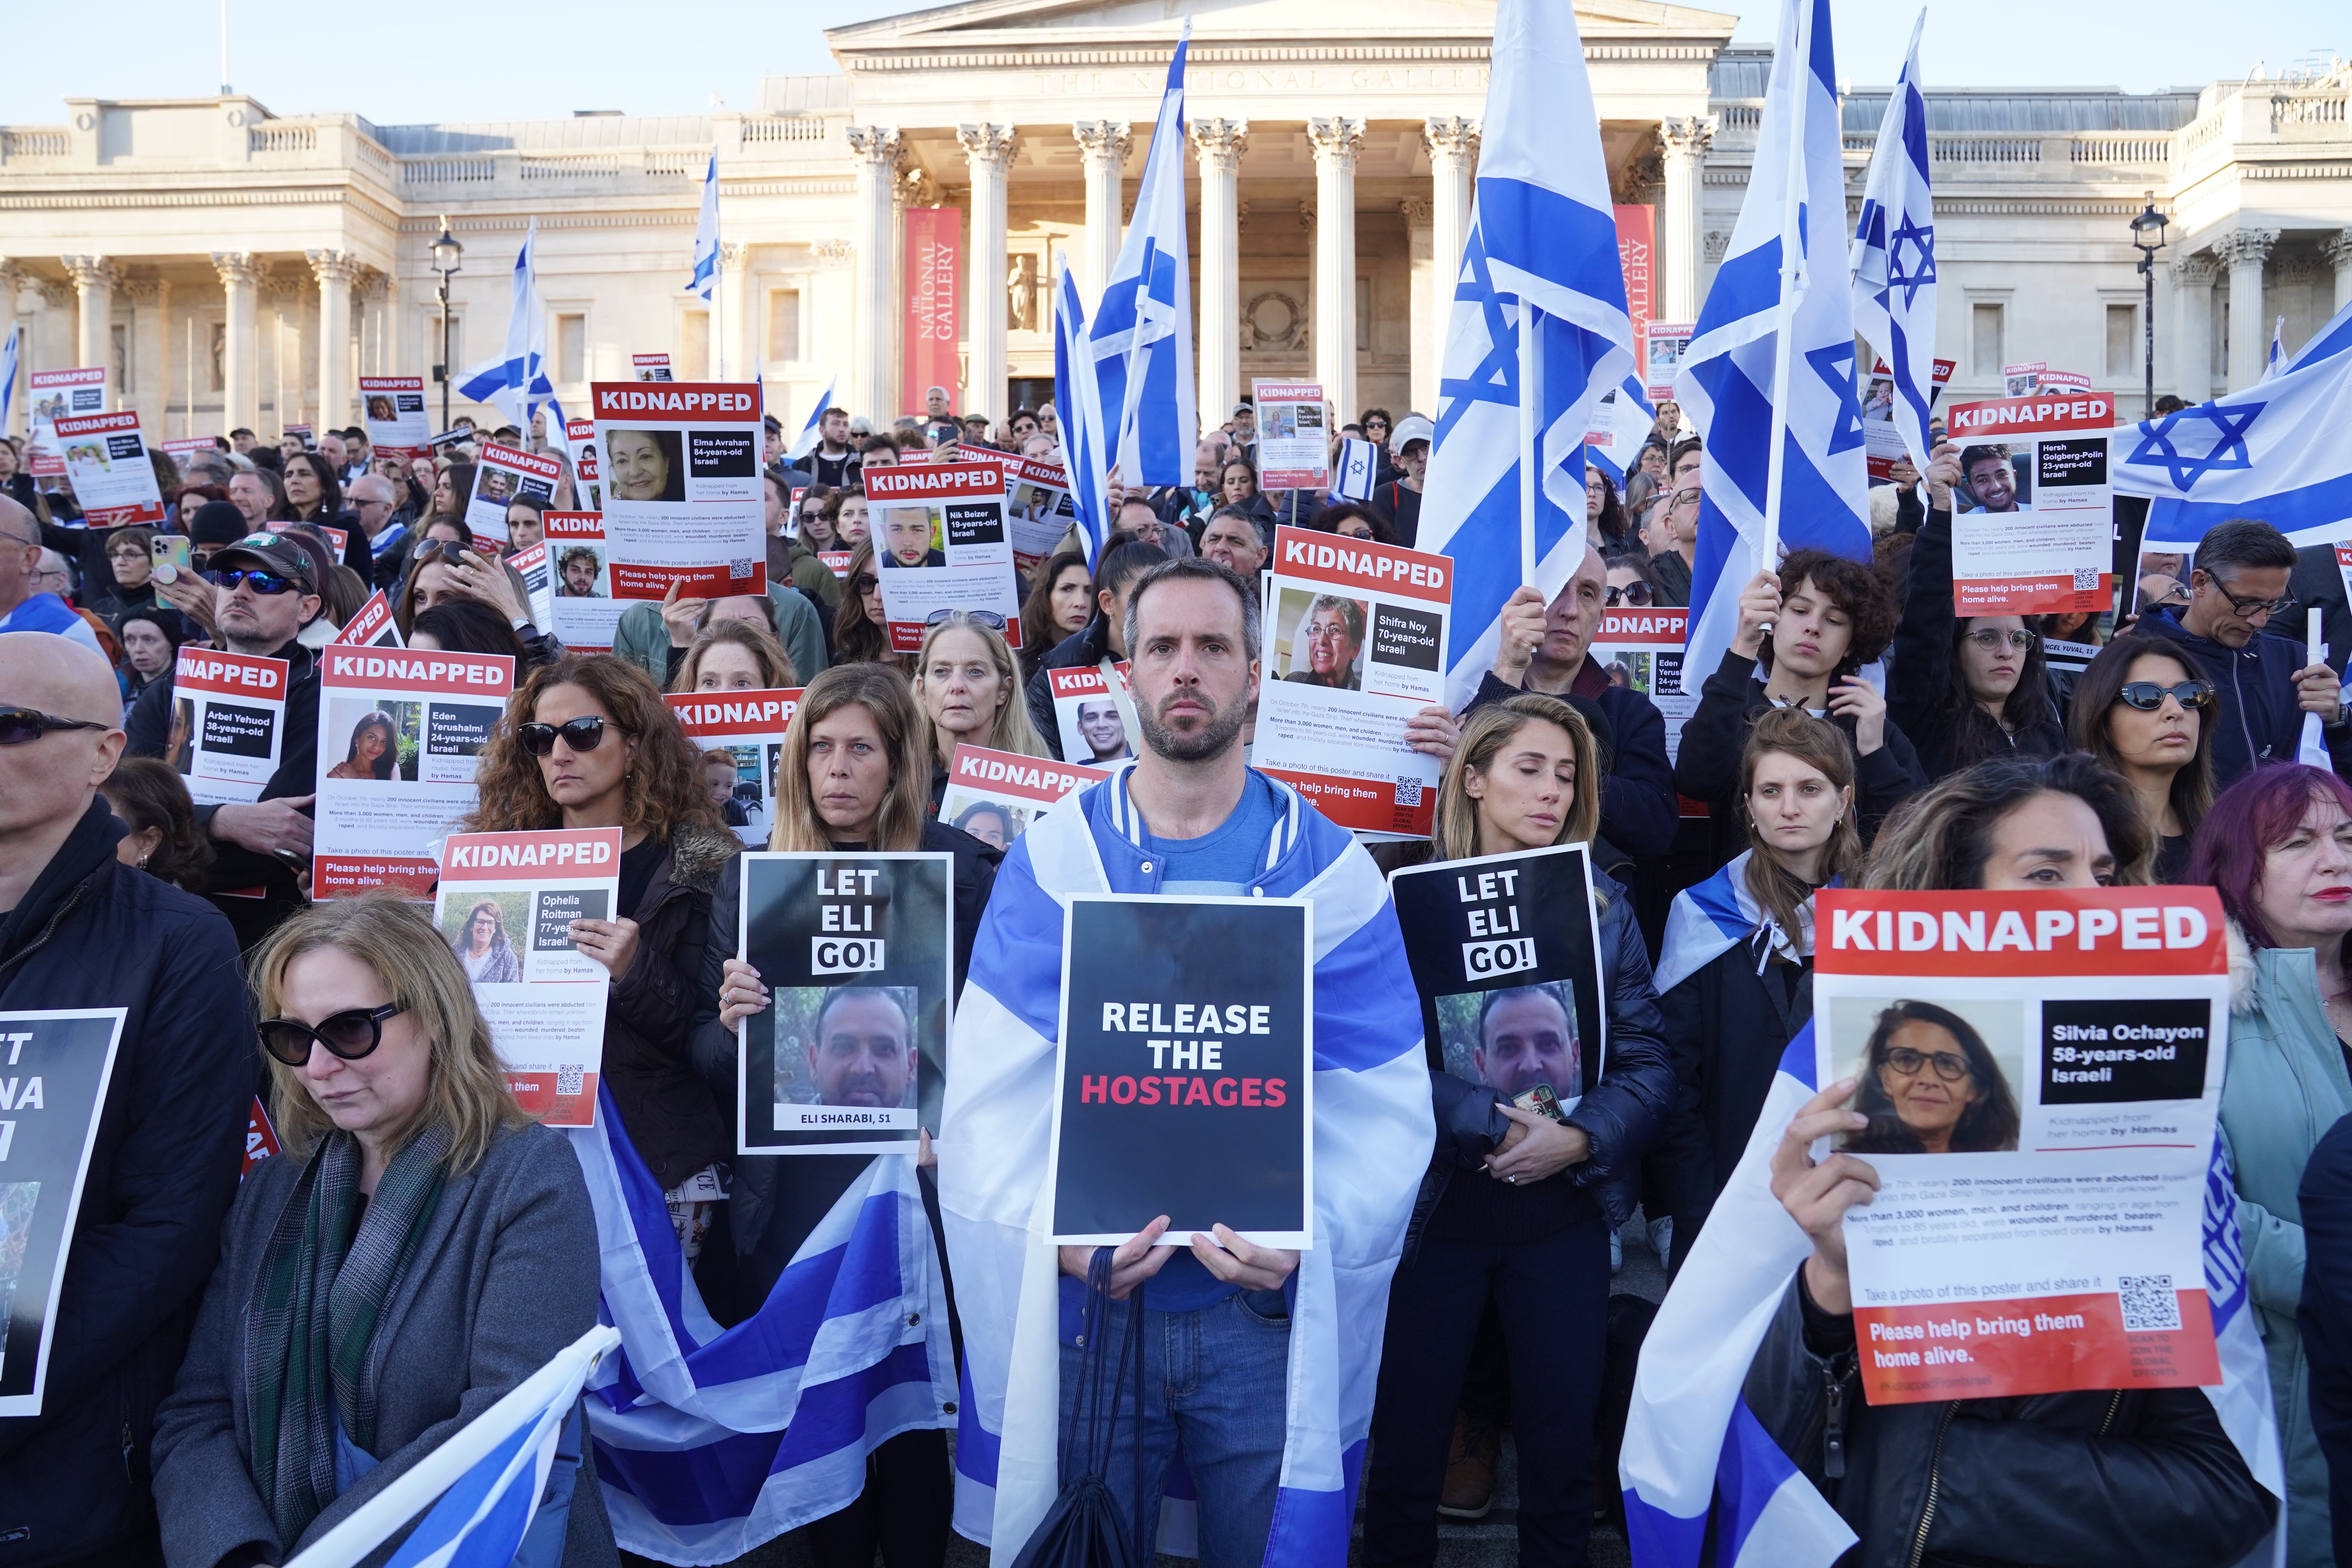 Members of the Jewish community attend a Solidarity Rally in Trafalgar Square, central London, calling for the safe return of hostages on Sunday